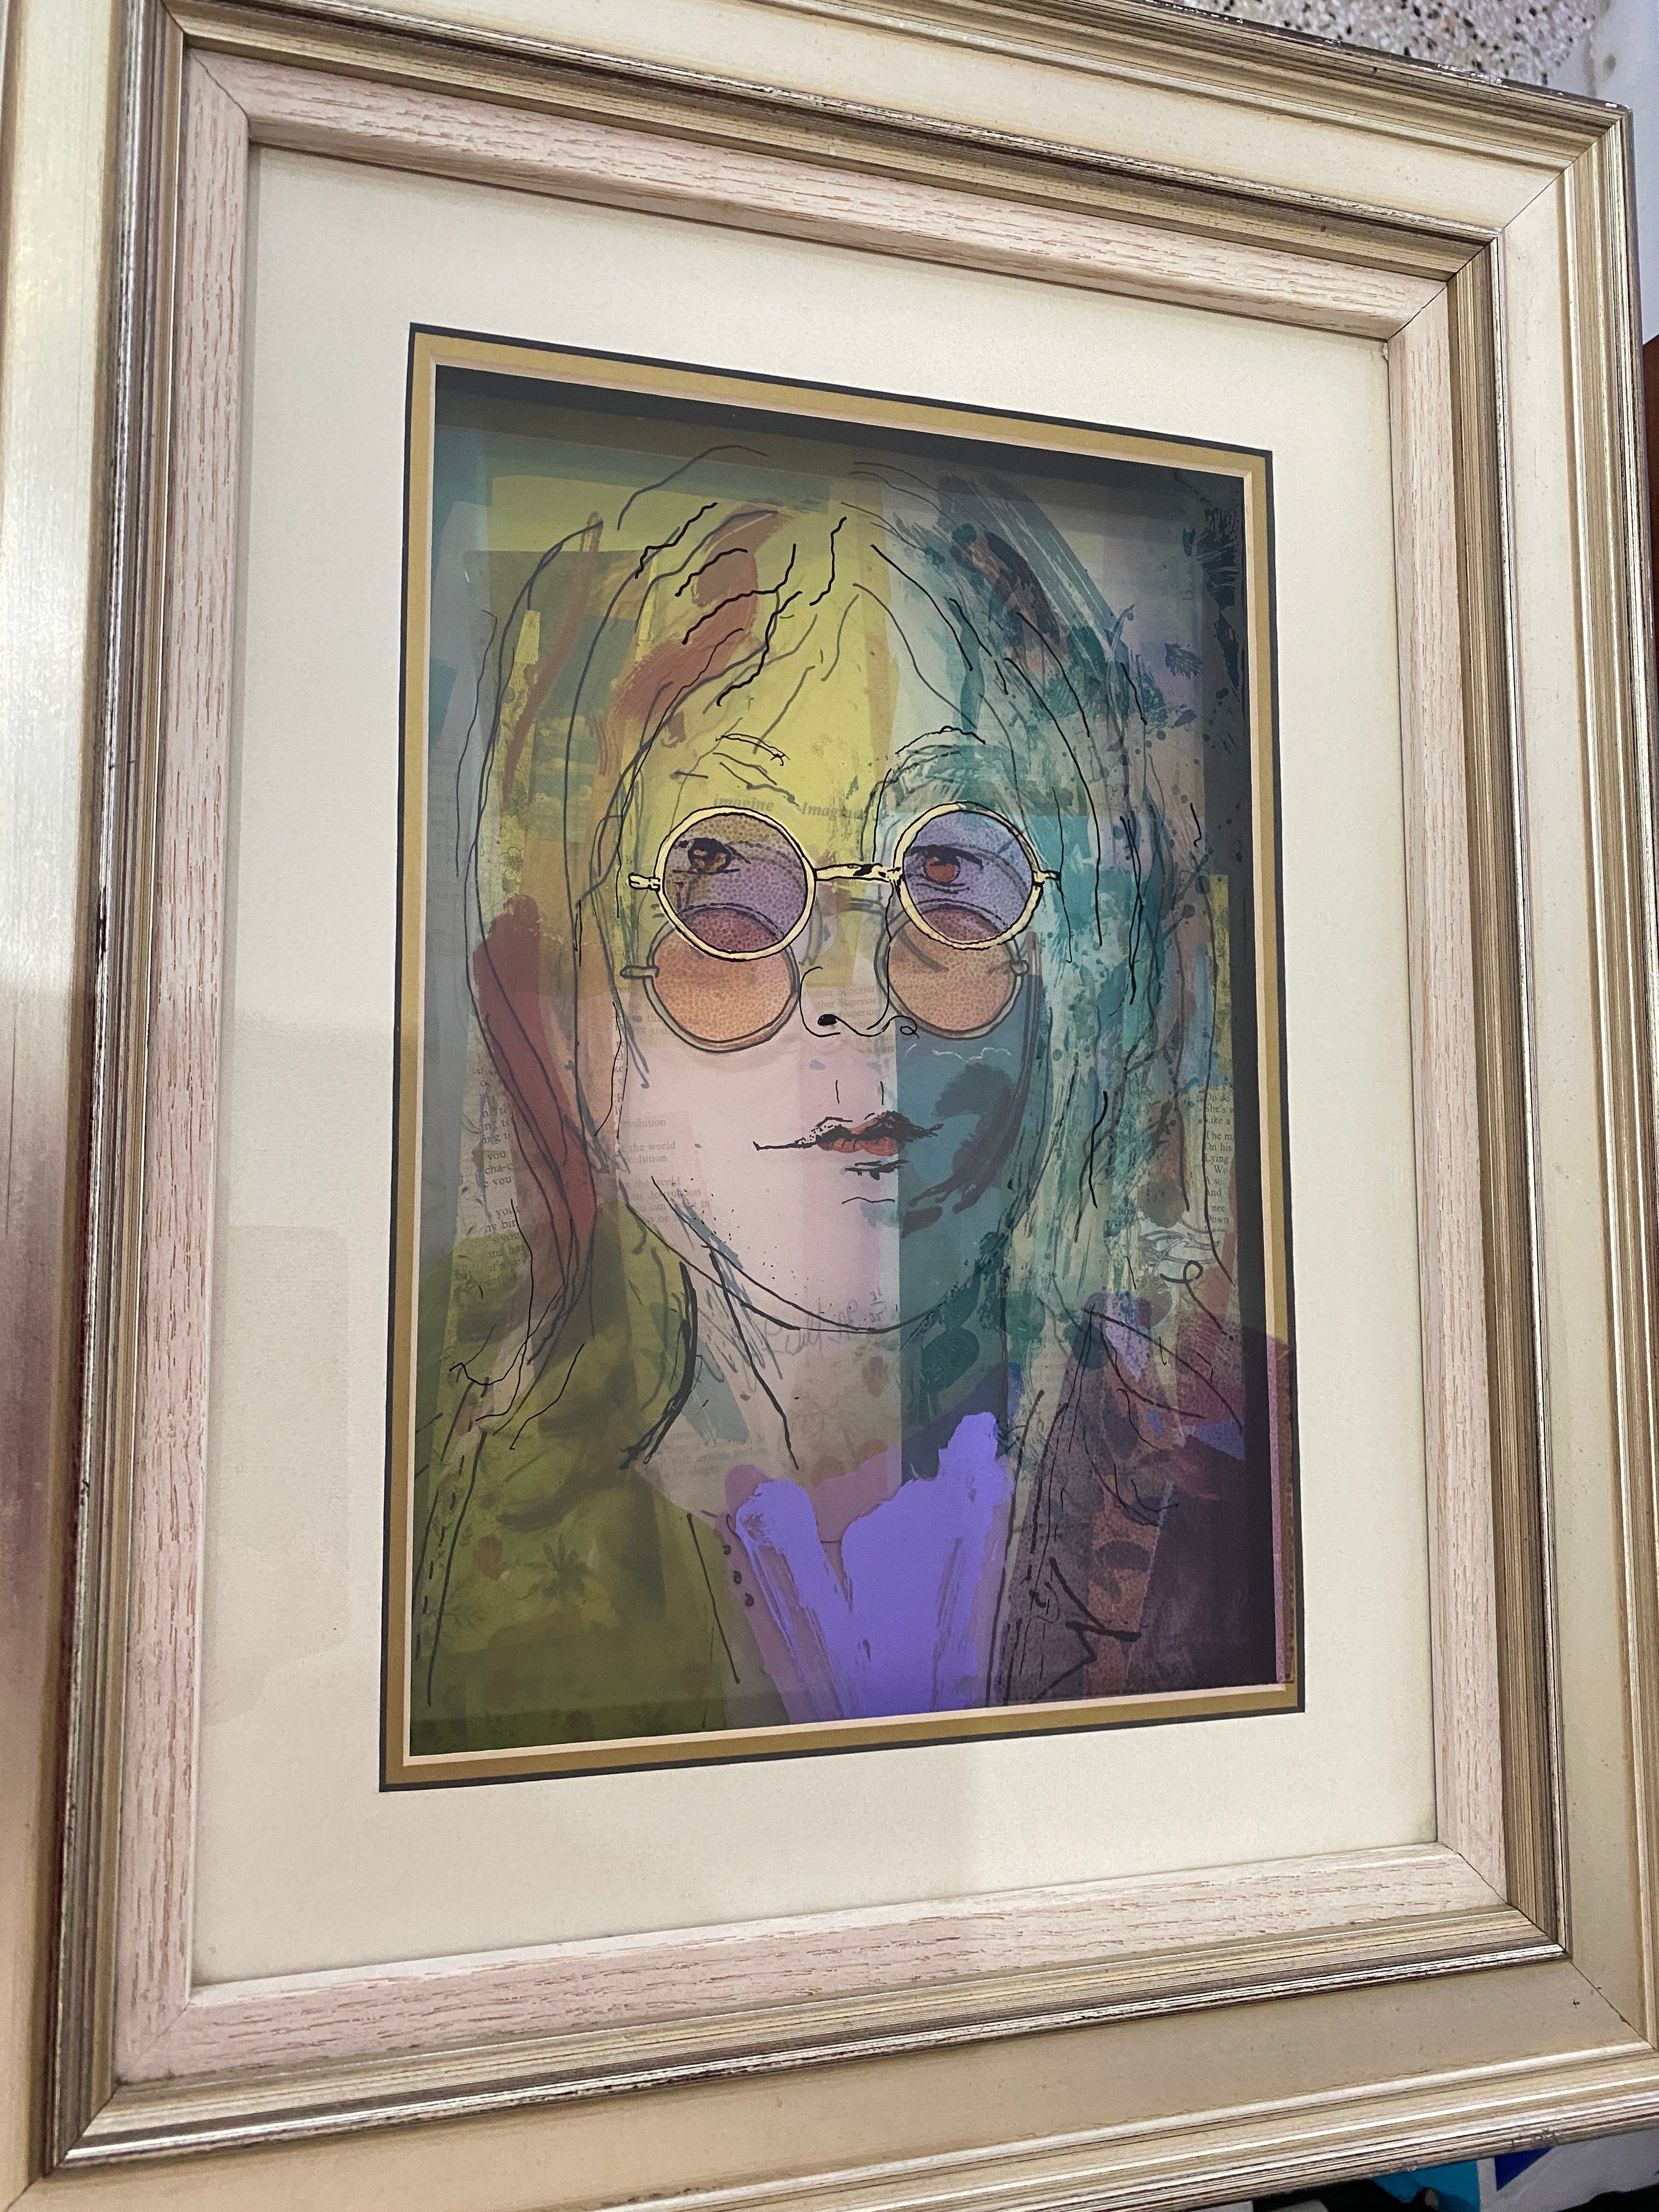 This three-dimensional painting on glass of the singer John Lennon was created by Jean Pierre Weill.

Note: Signed AP Edition 31 of 35

Note: Overall dimensions are 20.75